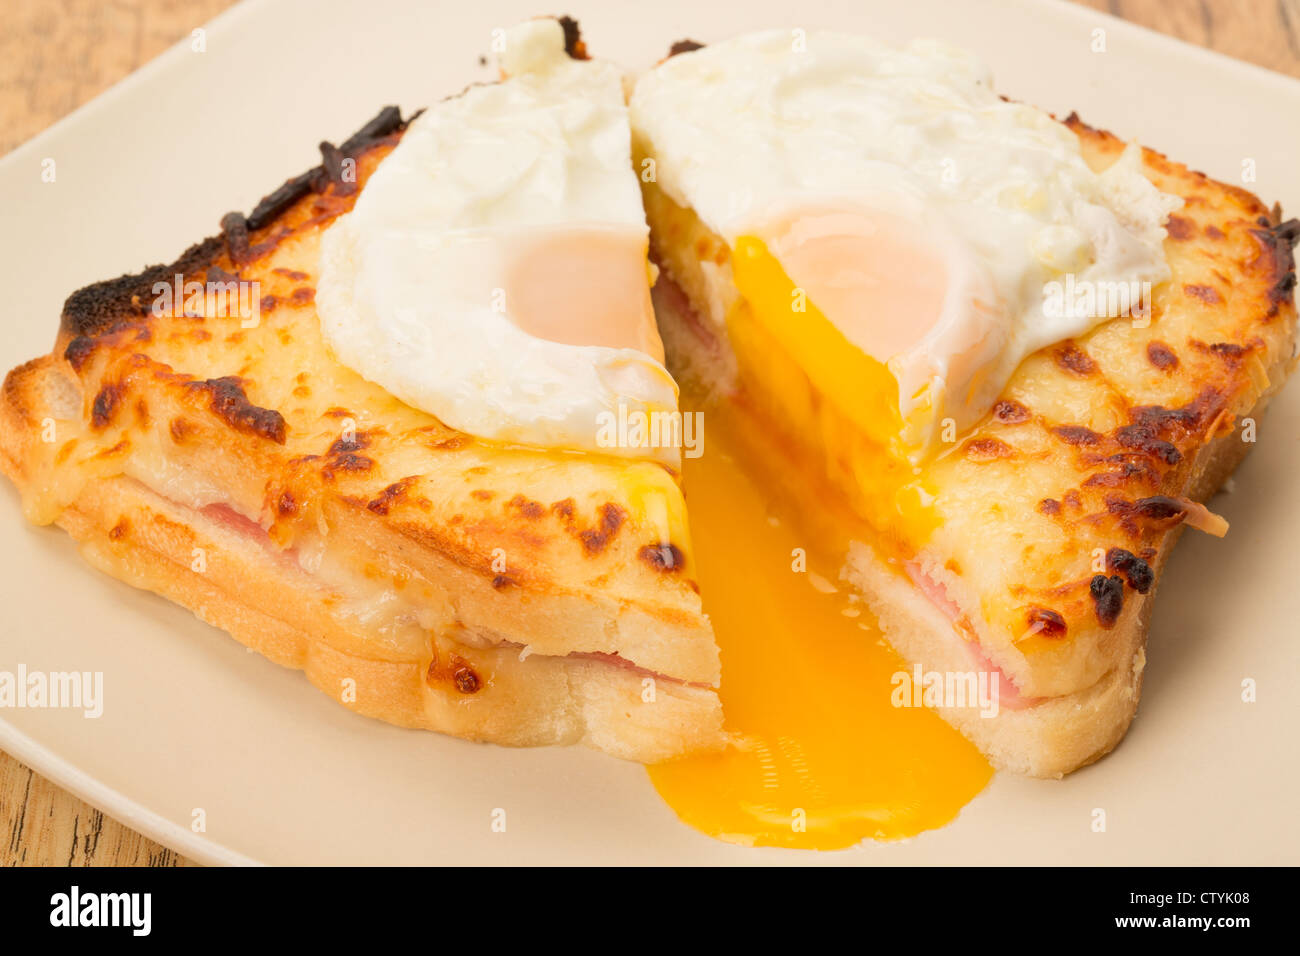 Classic French toasted sandwich or Croque Madame sliced in half with a fried egg on top of the toasted cheese - studio shot Stock Photo